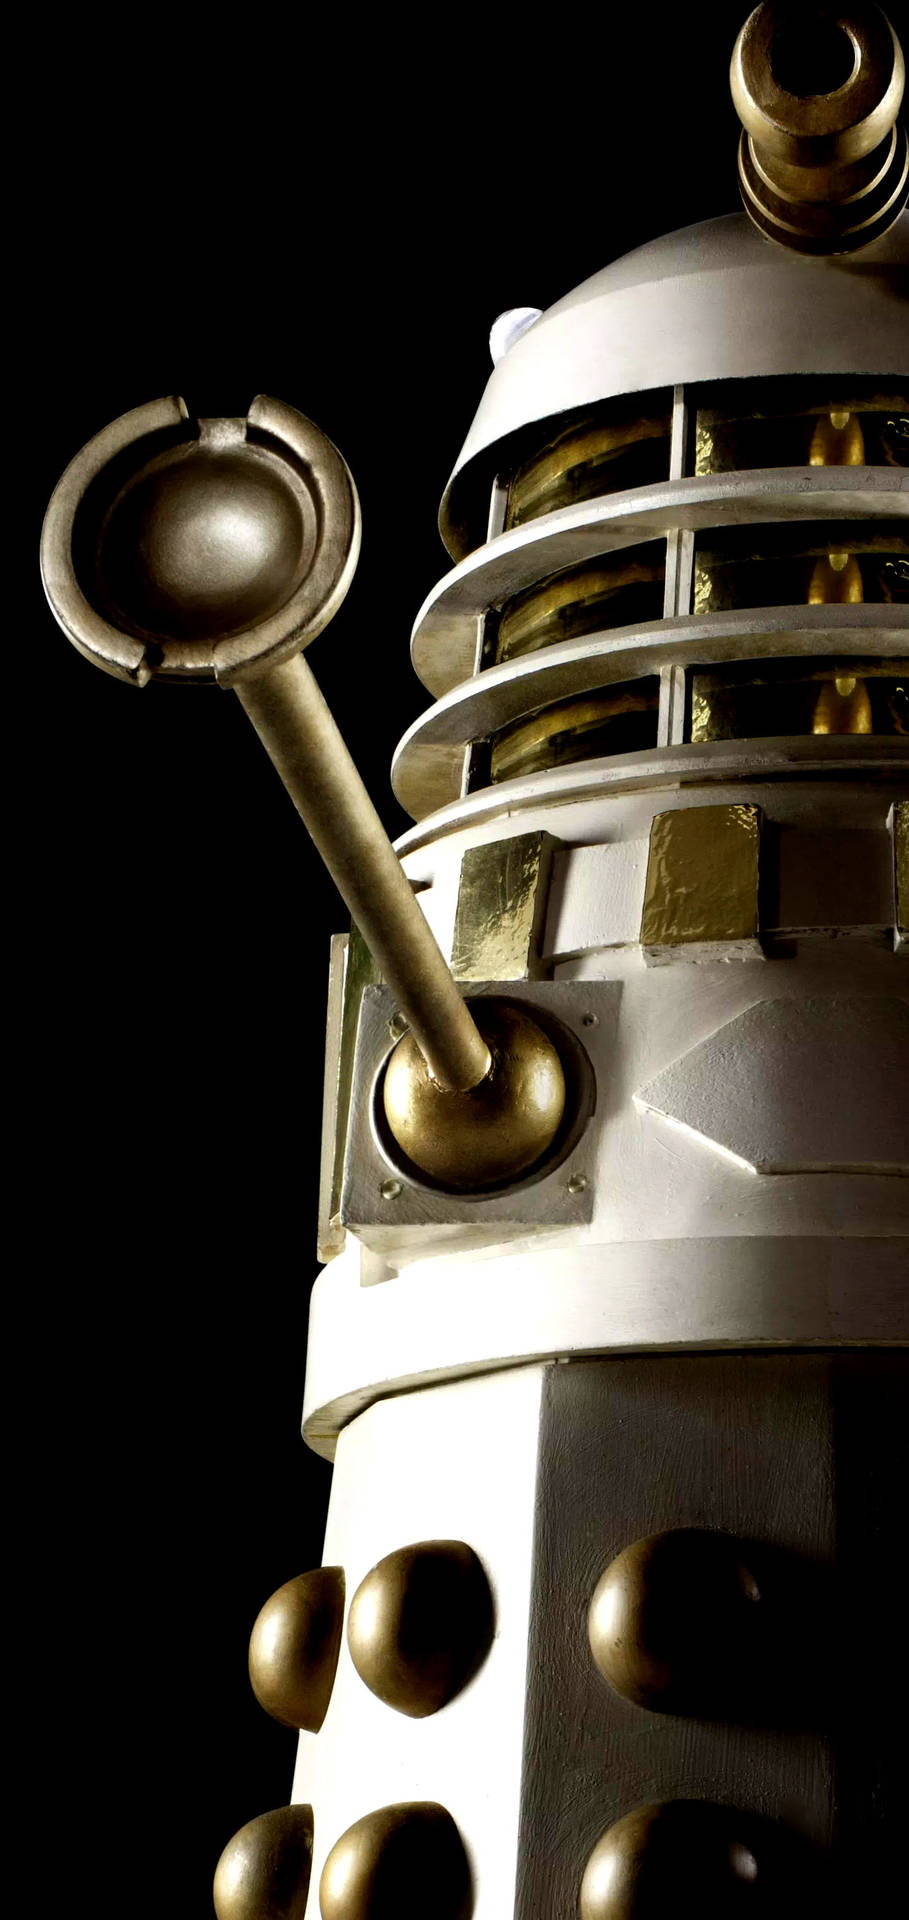 Caption: Samsung S10 With Dr. Who Dalek Clock Themed Wallpaper Background